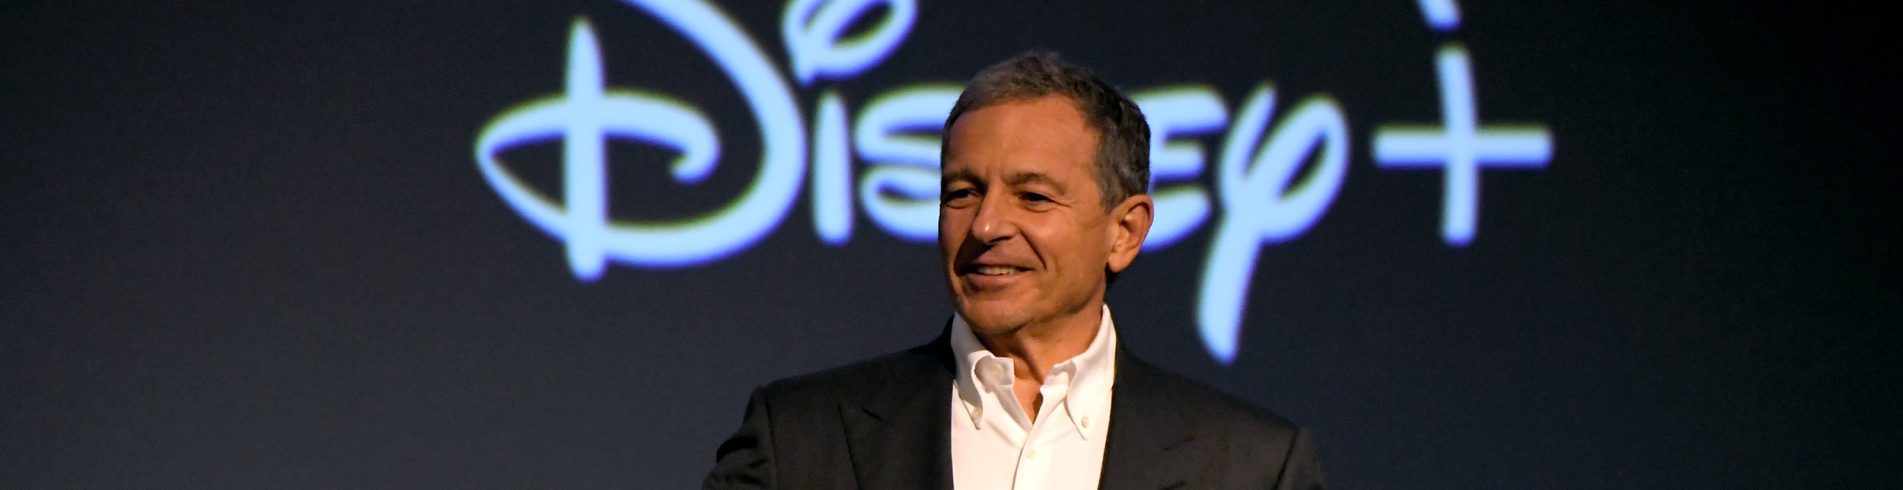 Disney CEO Bob Iger Tells That He Wants To Rebuild In Town Hall